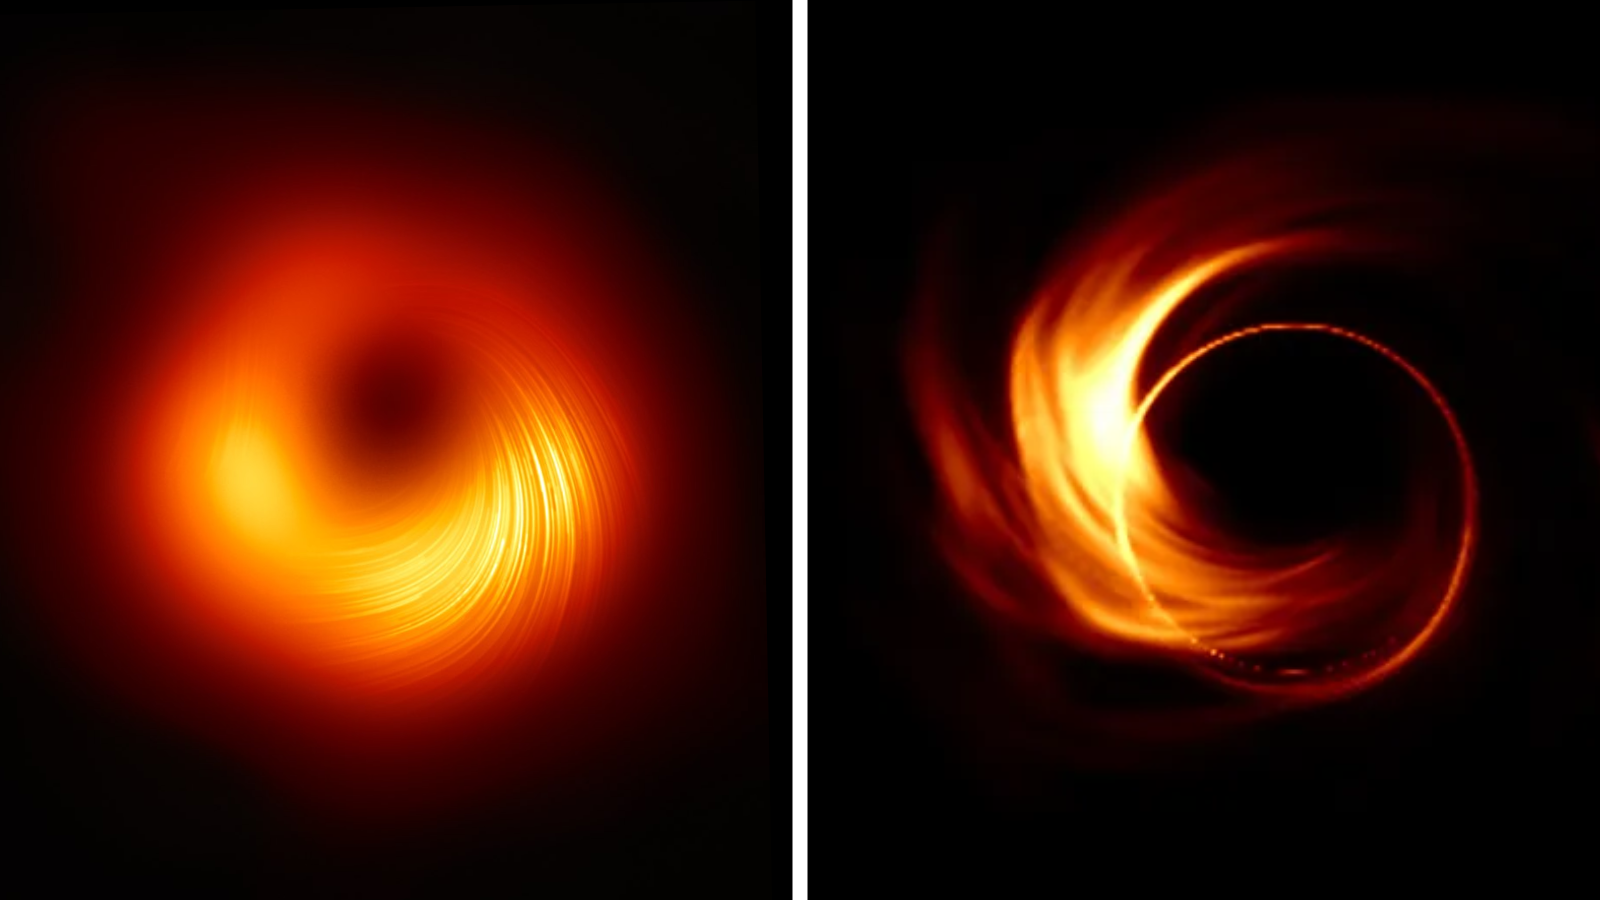 On the left is a swirly orange donut shape object and on the right a similar scene, but more sparse and chatotic.